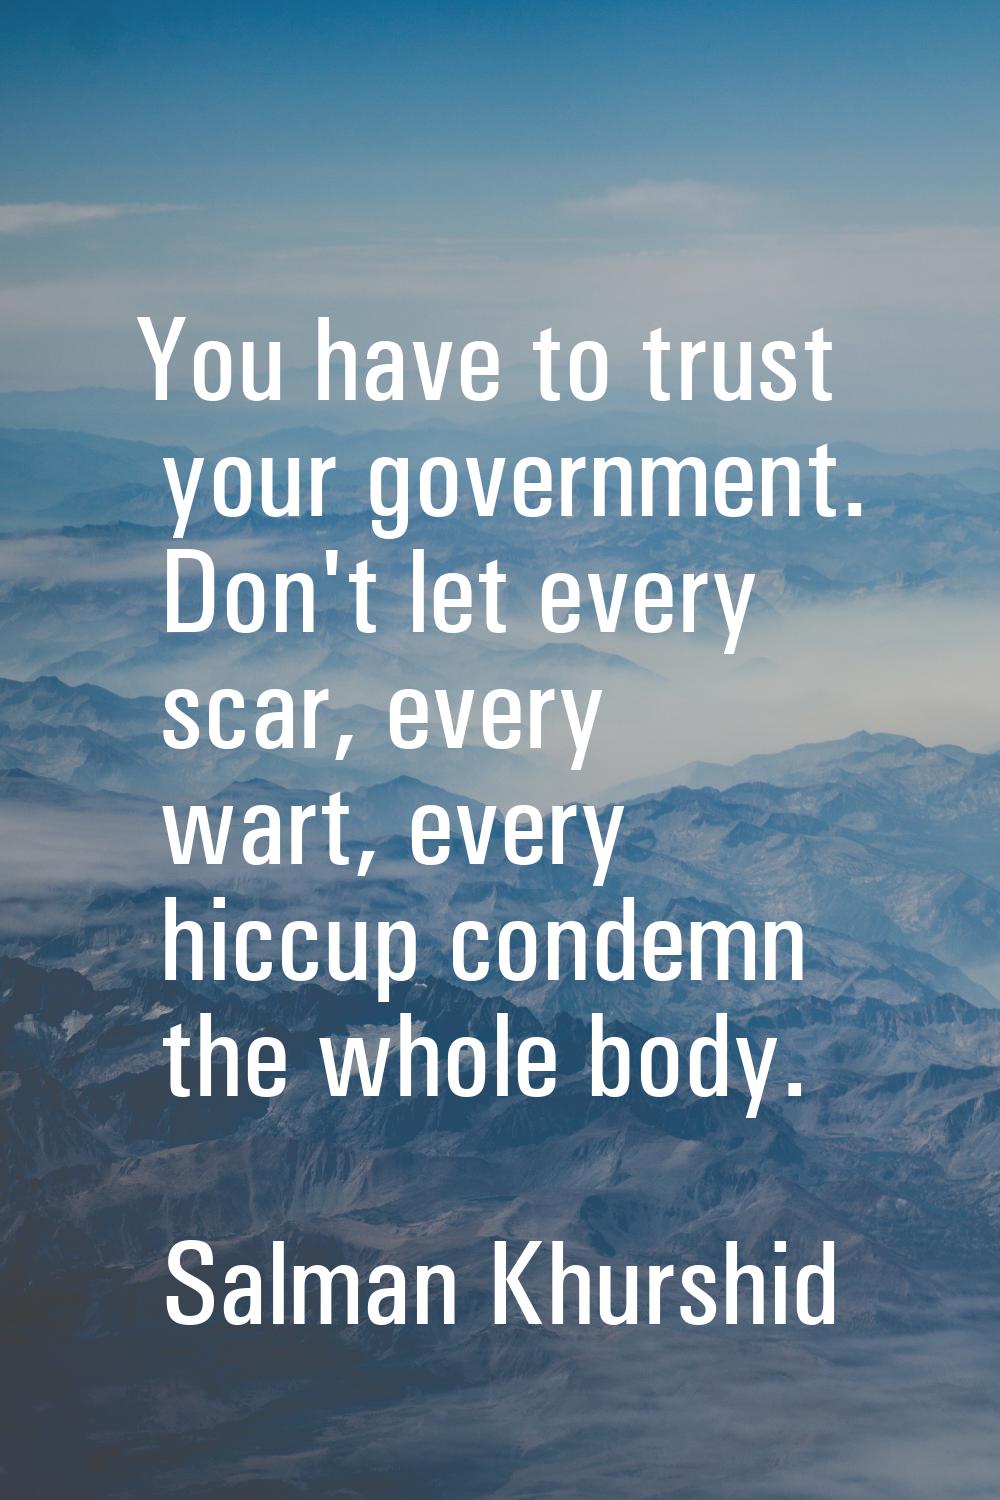 You have to trust your government. Don't let every scar, every wart, every hiccup condemn the whole